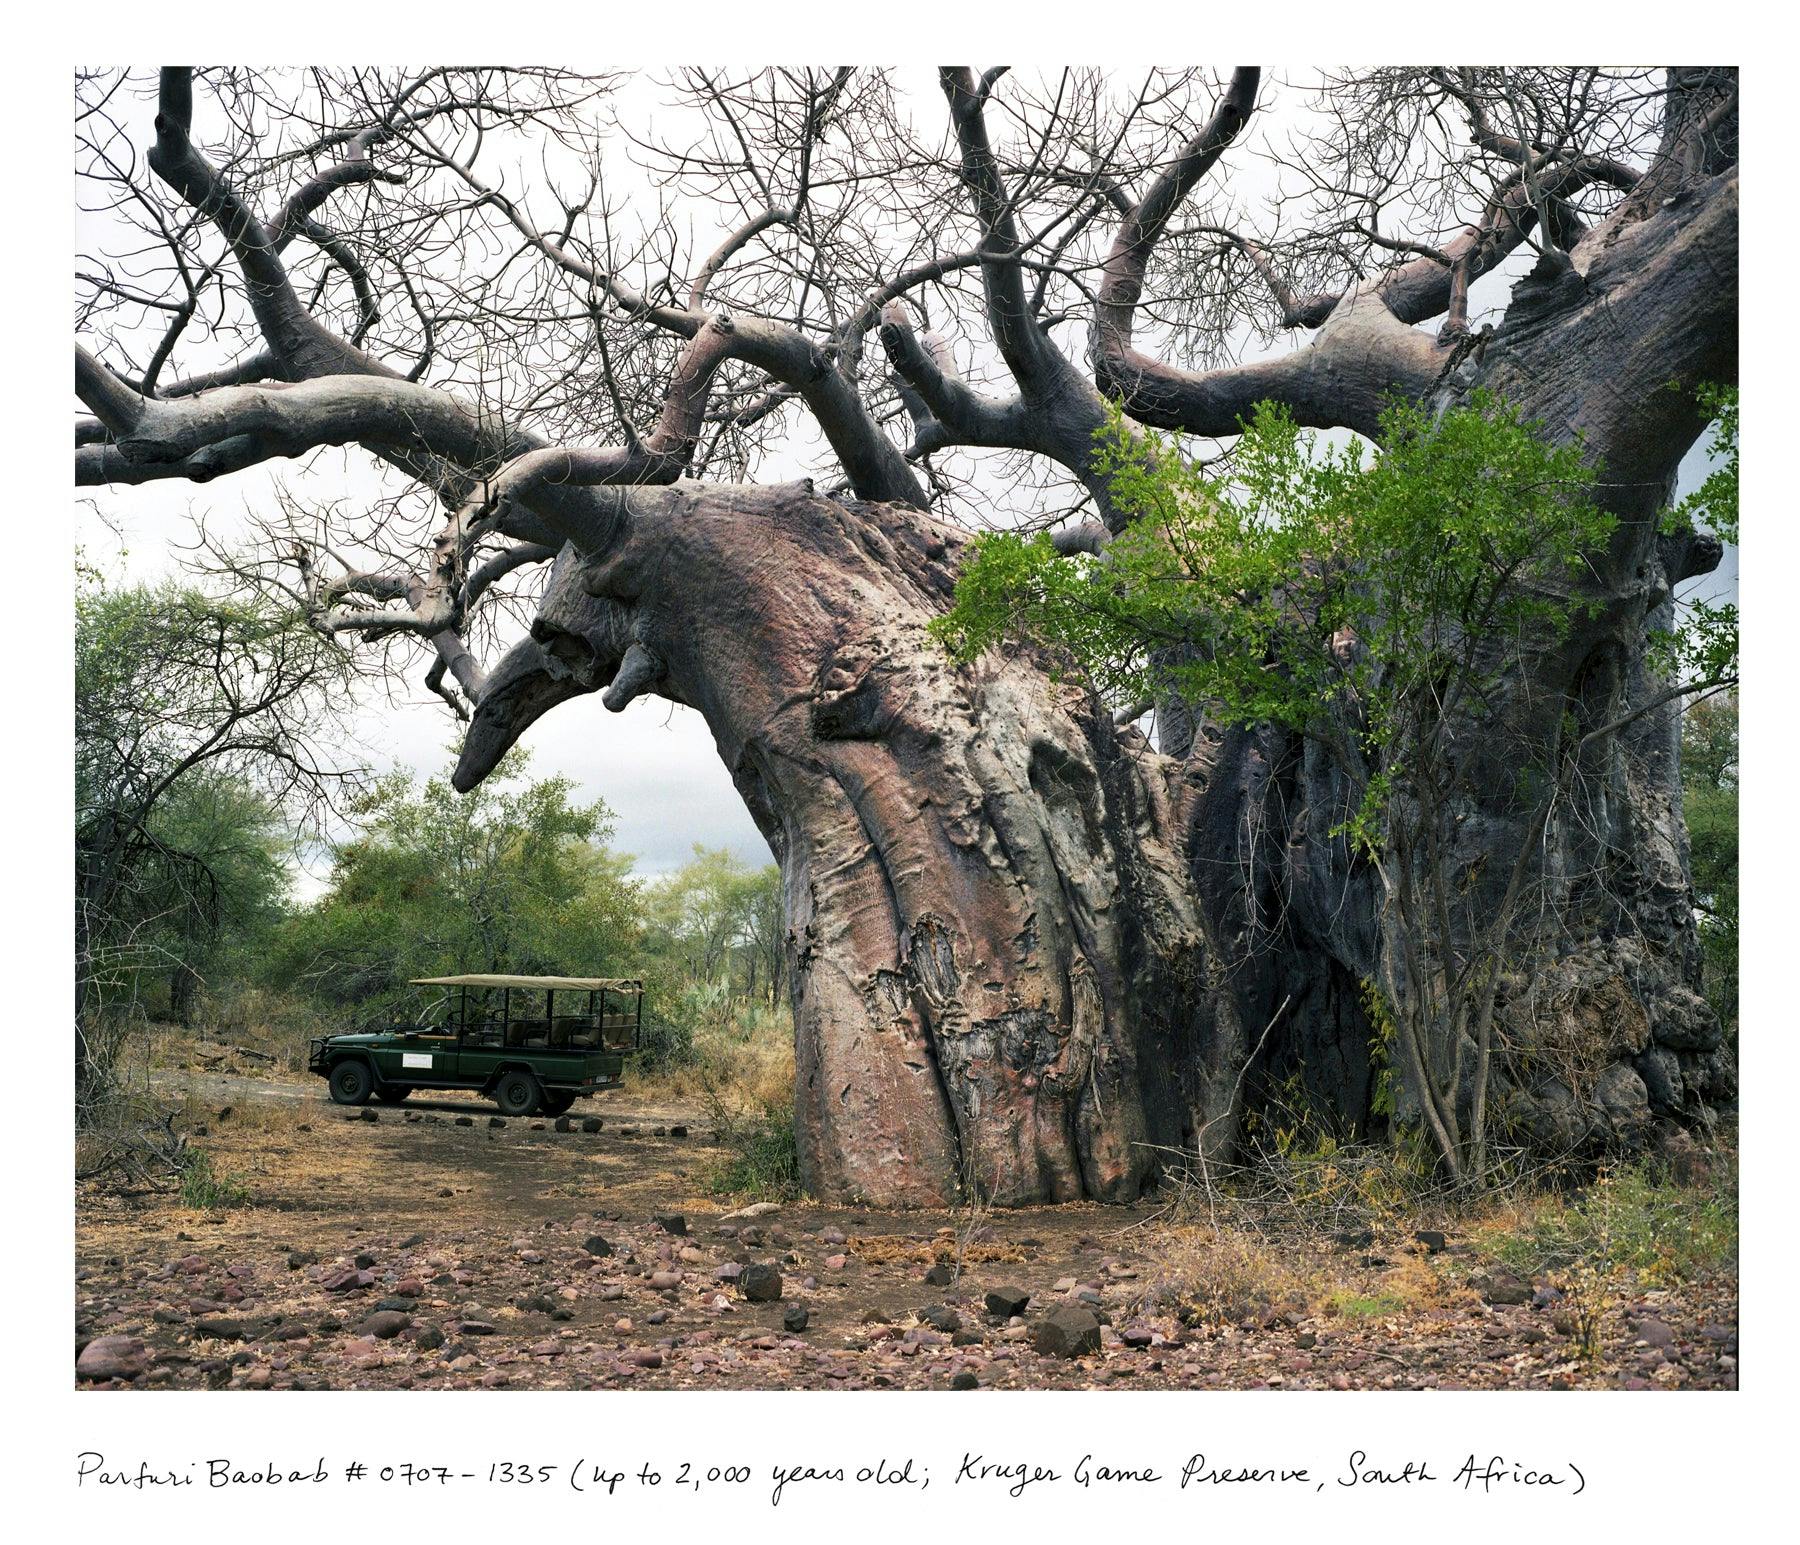 Rachel Sussman - Pafuri baobab #0707-1335 (Up to 2,000 years old; Kruger Game Preserve, South Afr - Photography